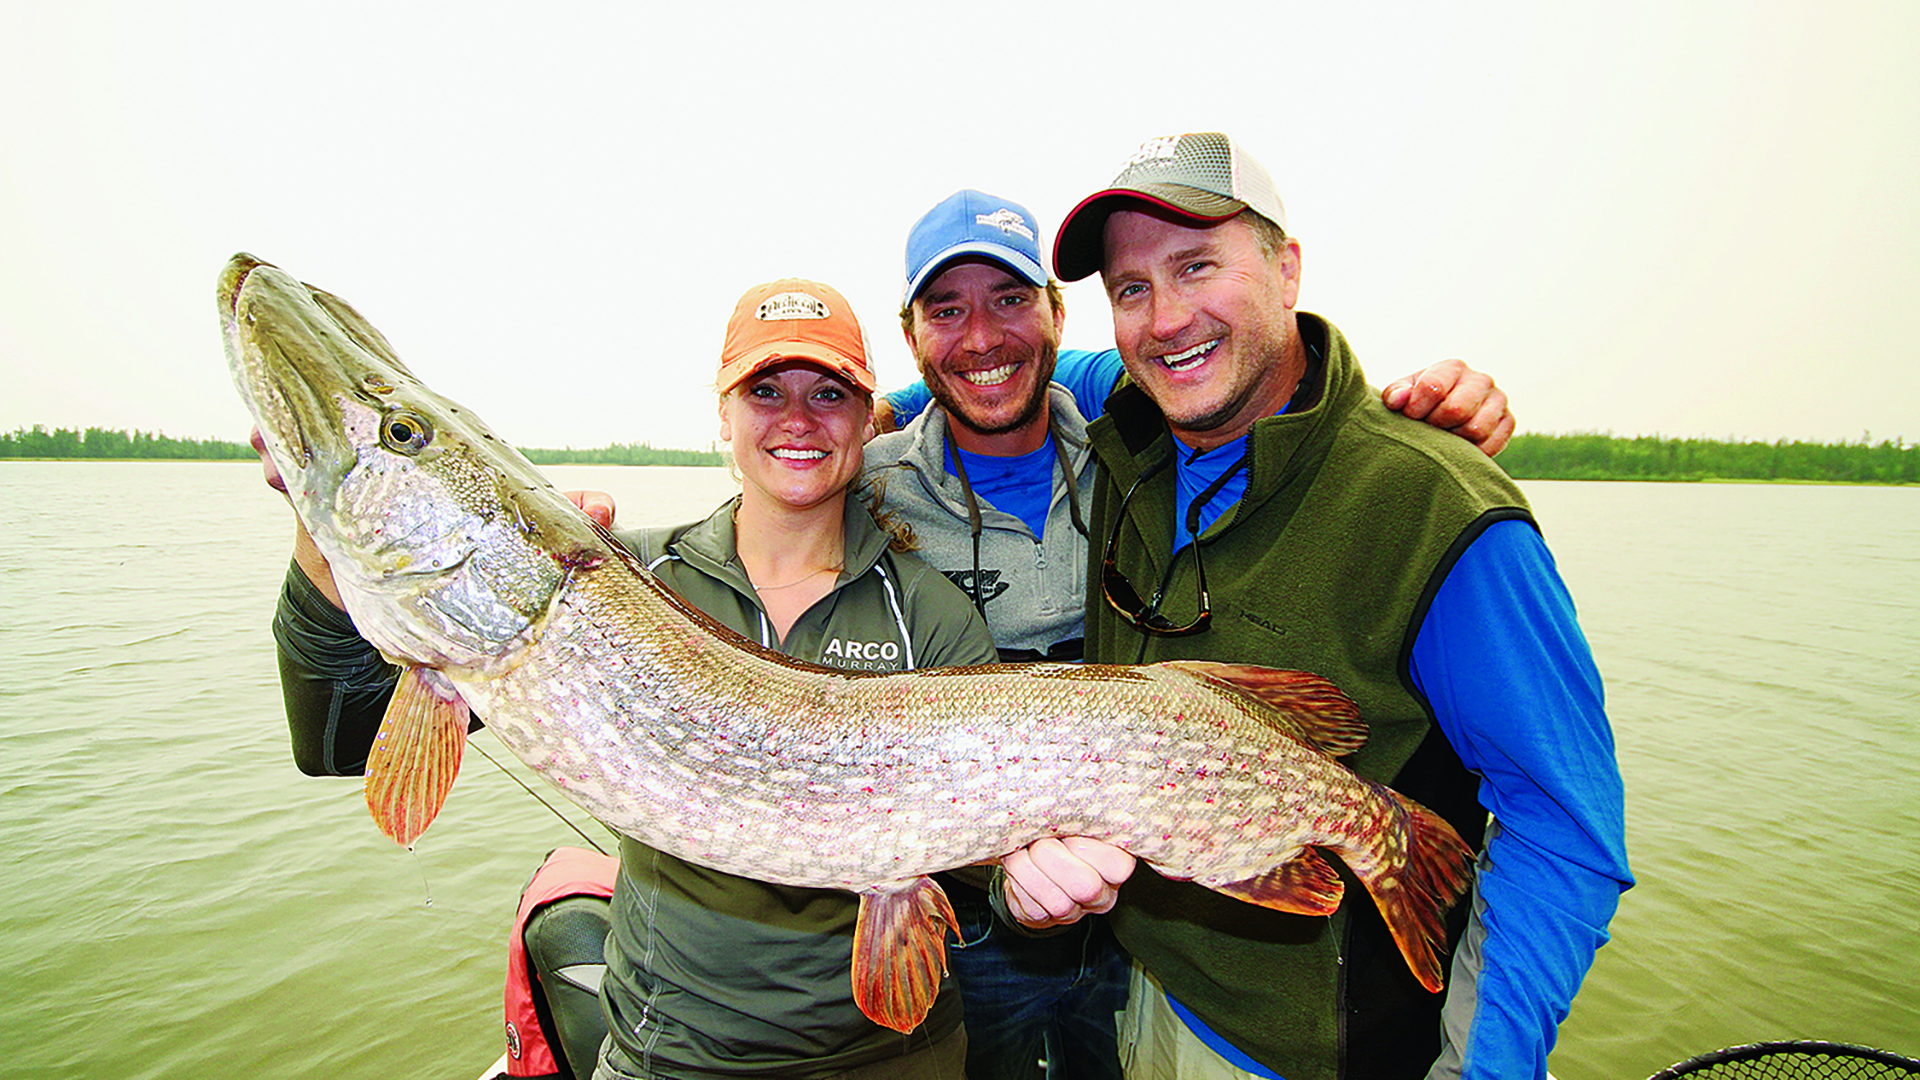 Catch a trophy pike - 2020 Angling Campaign